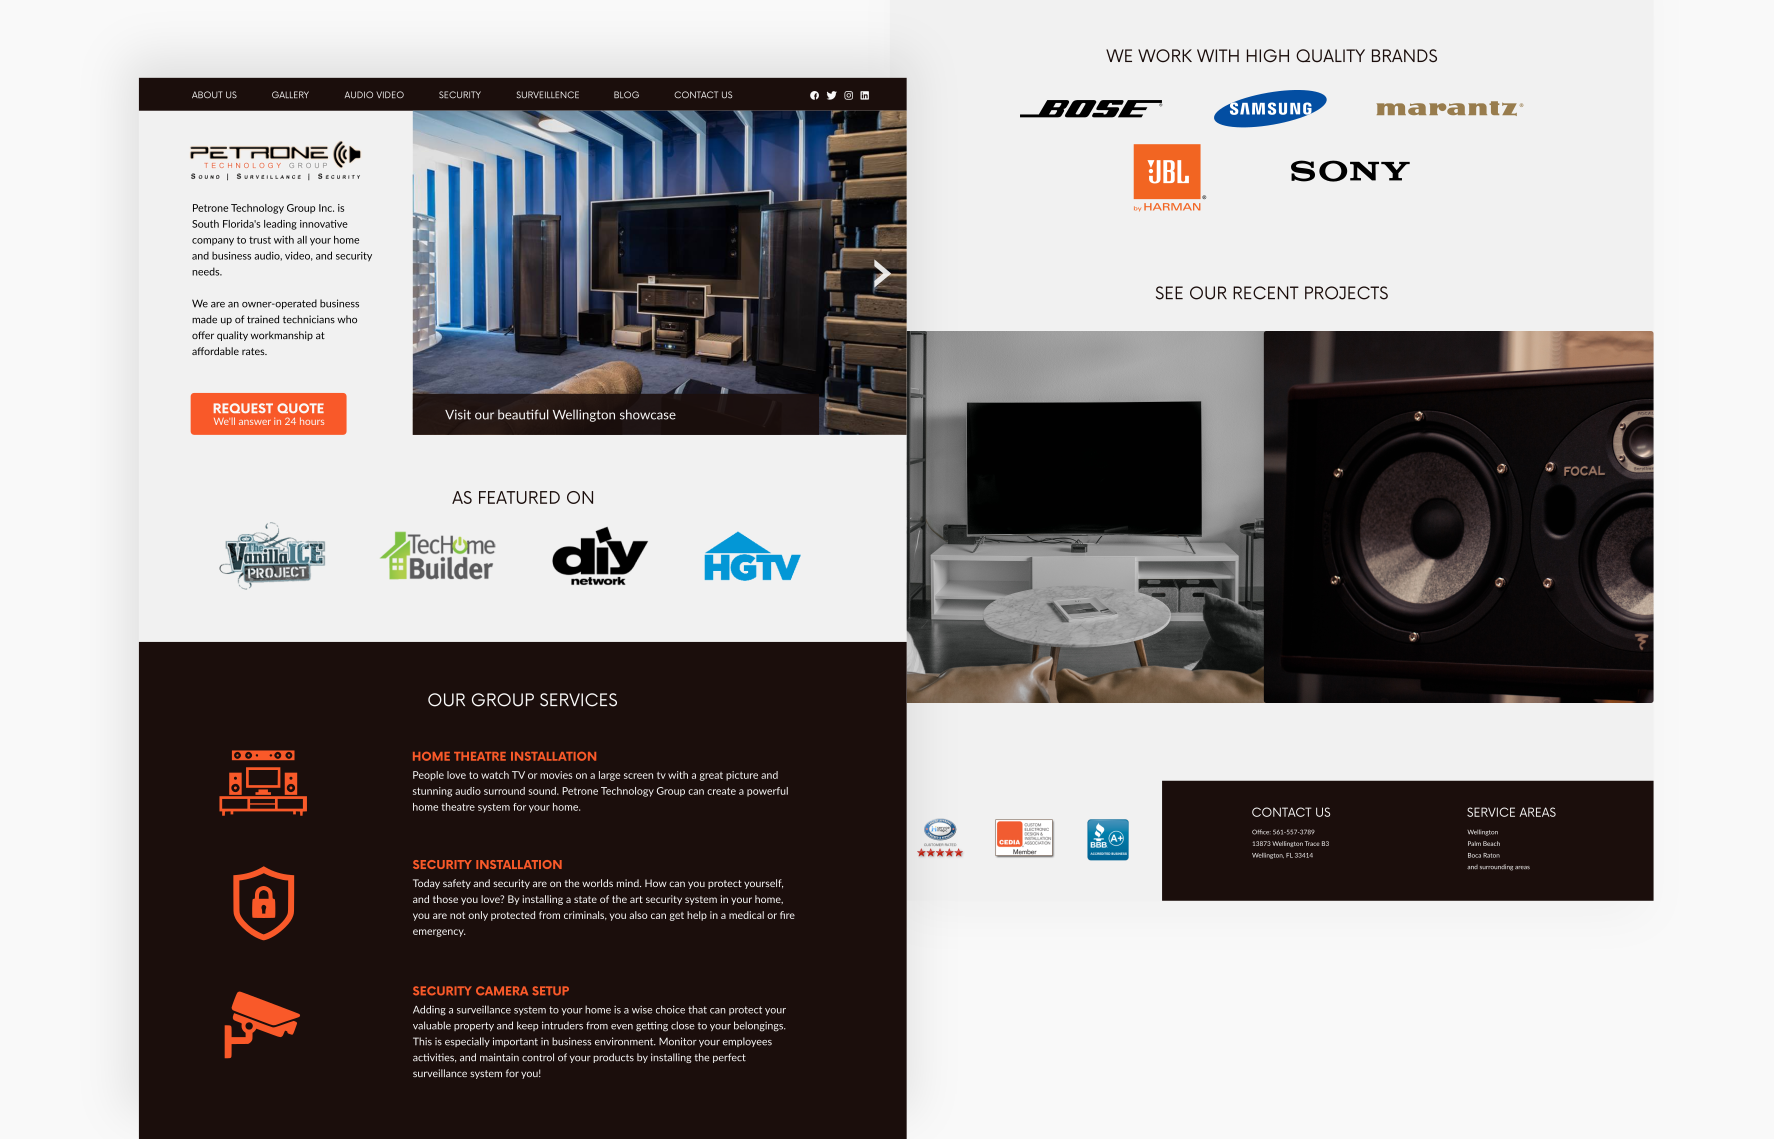 The proposed redesign for Petrone Technology Group's landing page